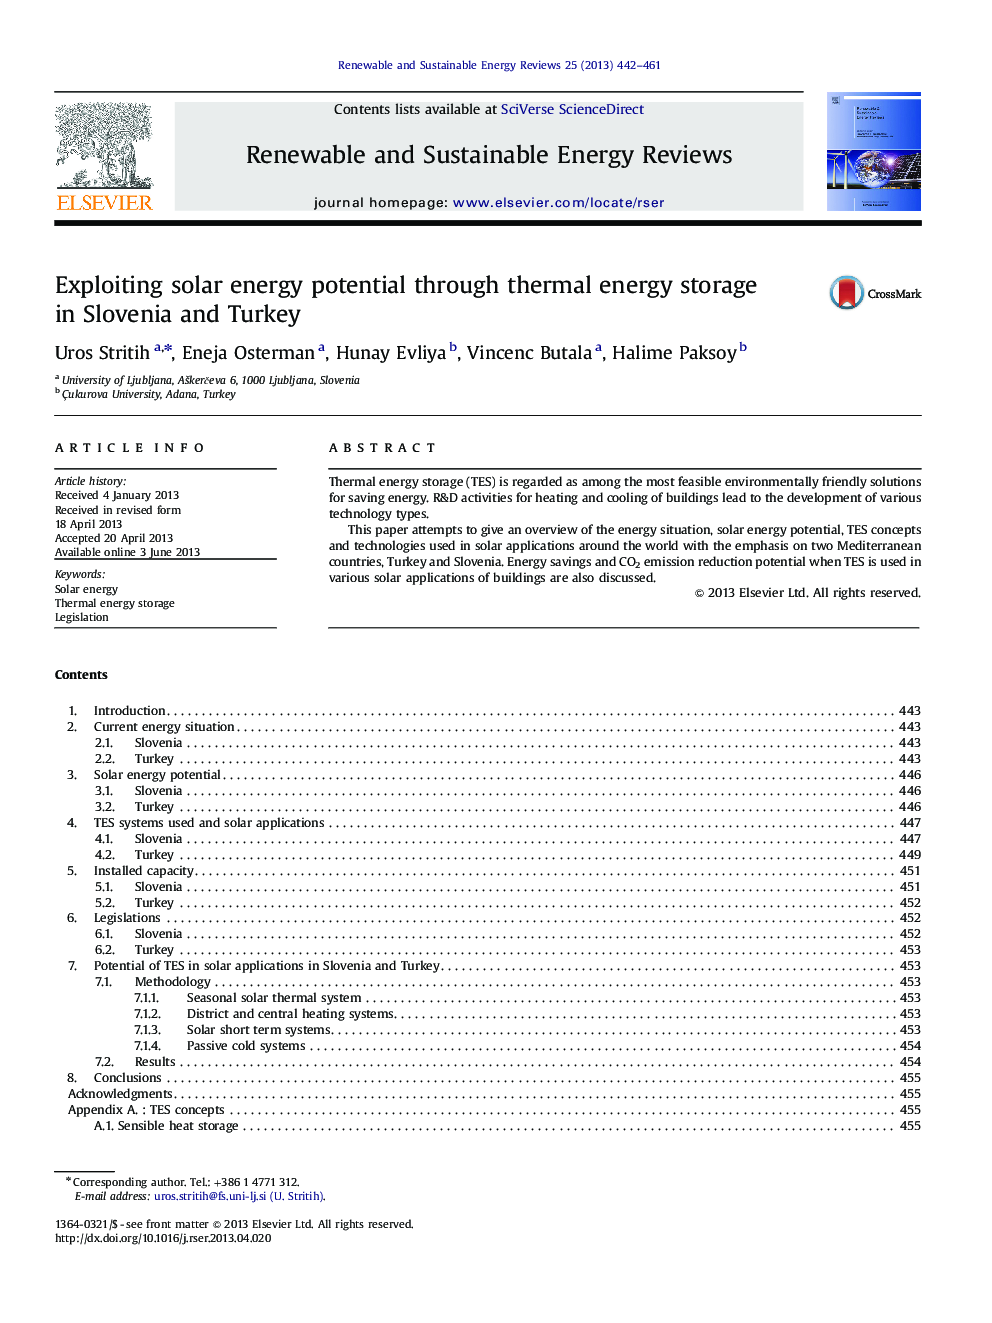 Exploiting solar energy potential through thermal energy storage in Slovenia and Turkey